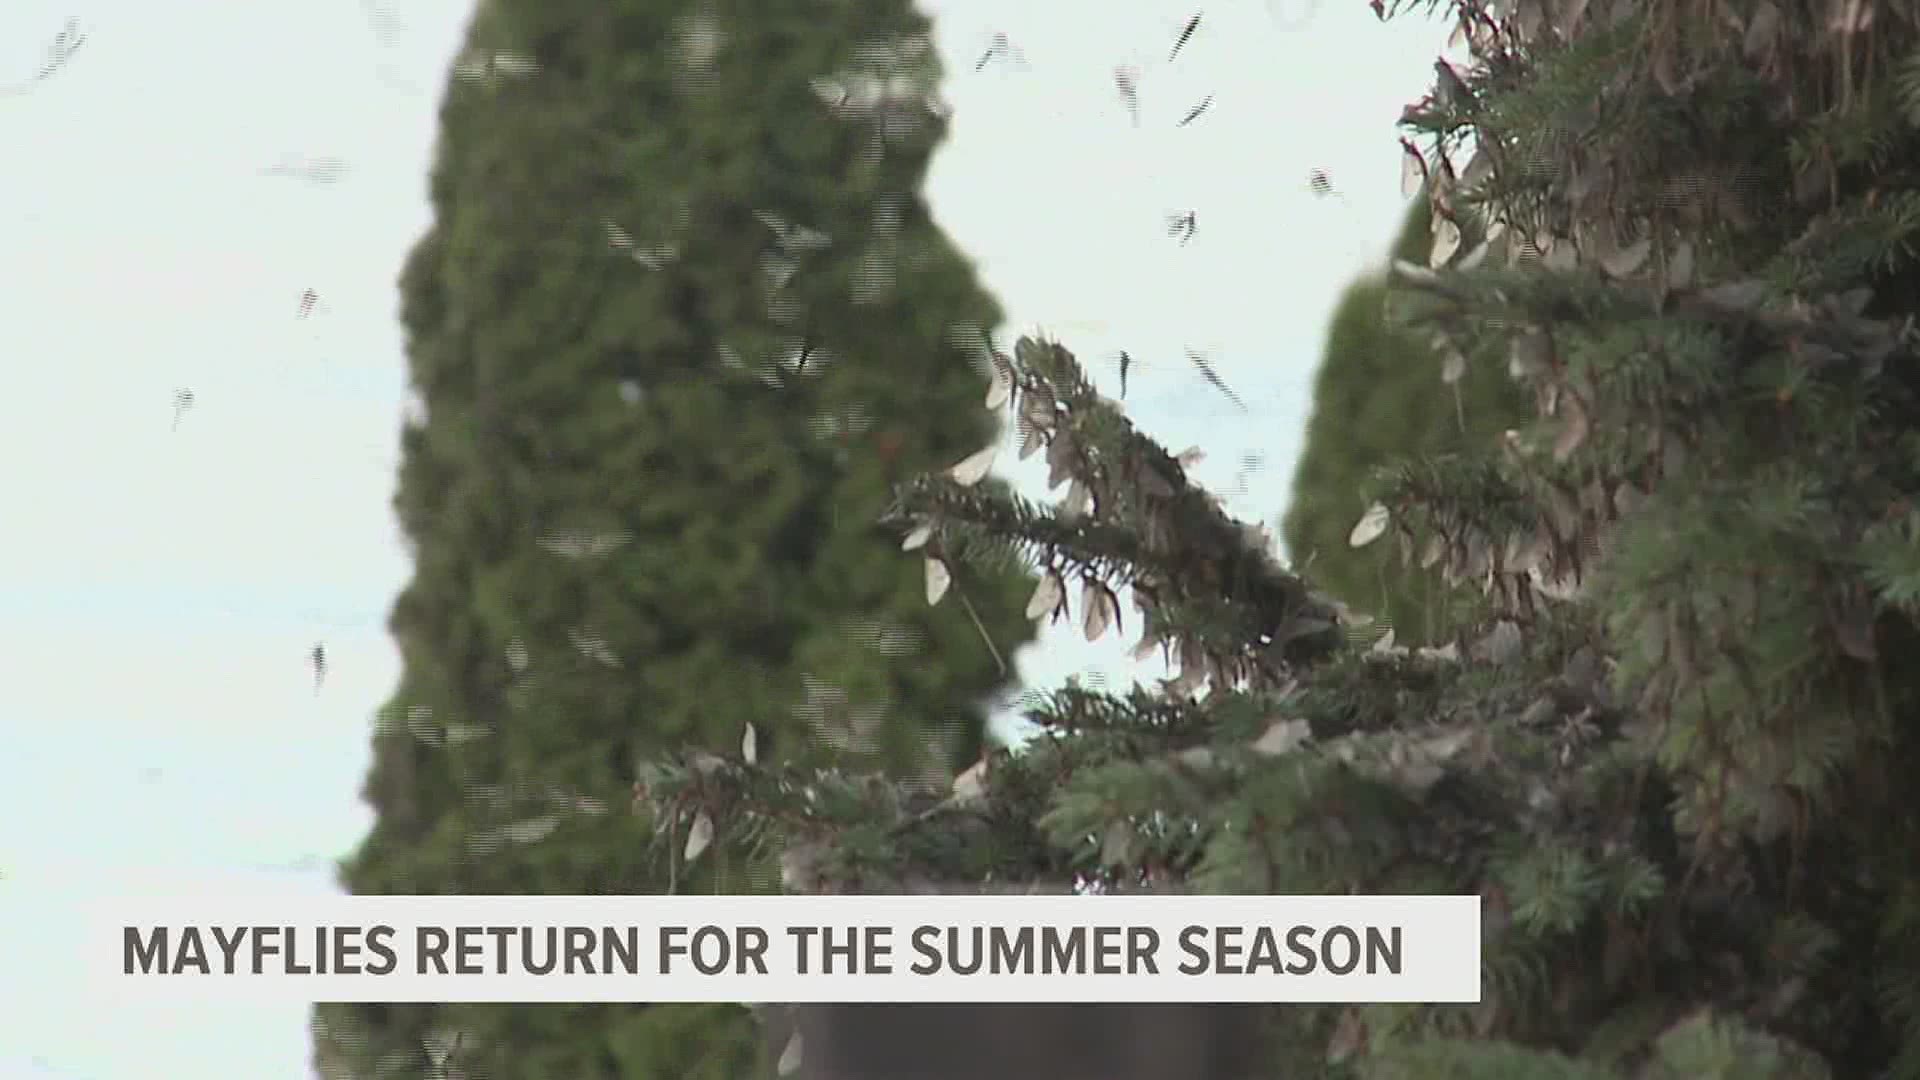 "There's that many bugs coming at you, they reflect in the light, it throws your eyes off, it's hard to see," said Mark Stivers, Columbia Borough manager.